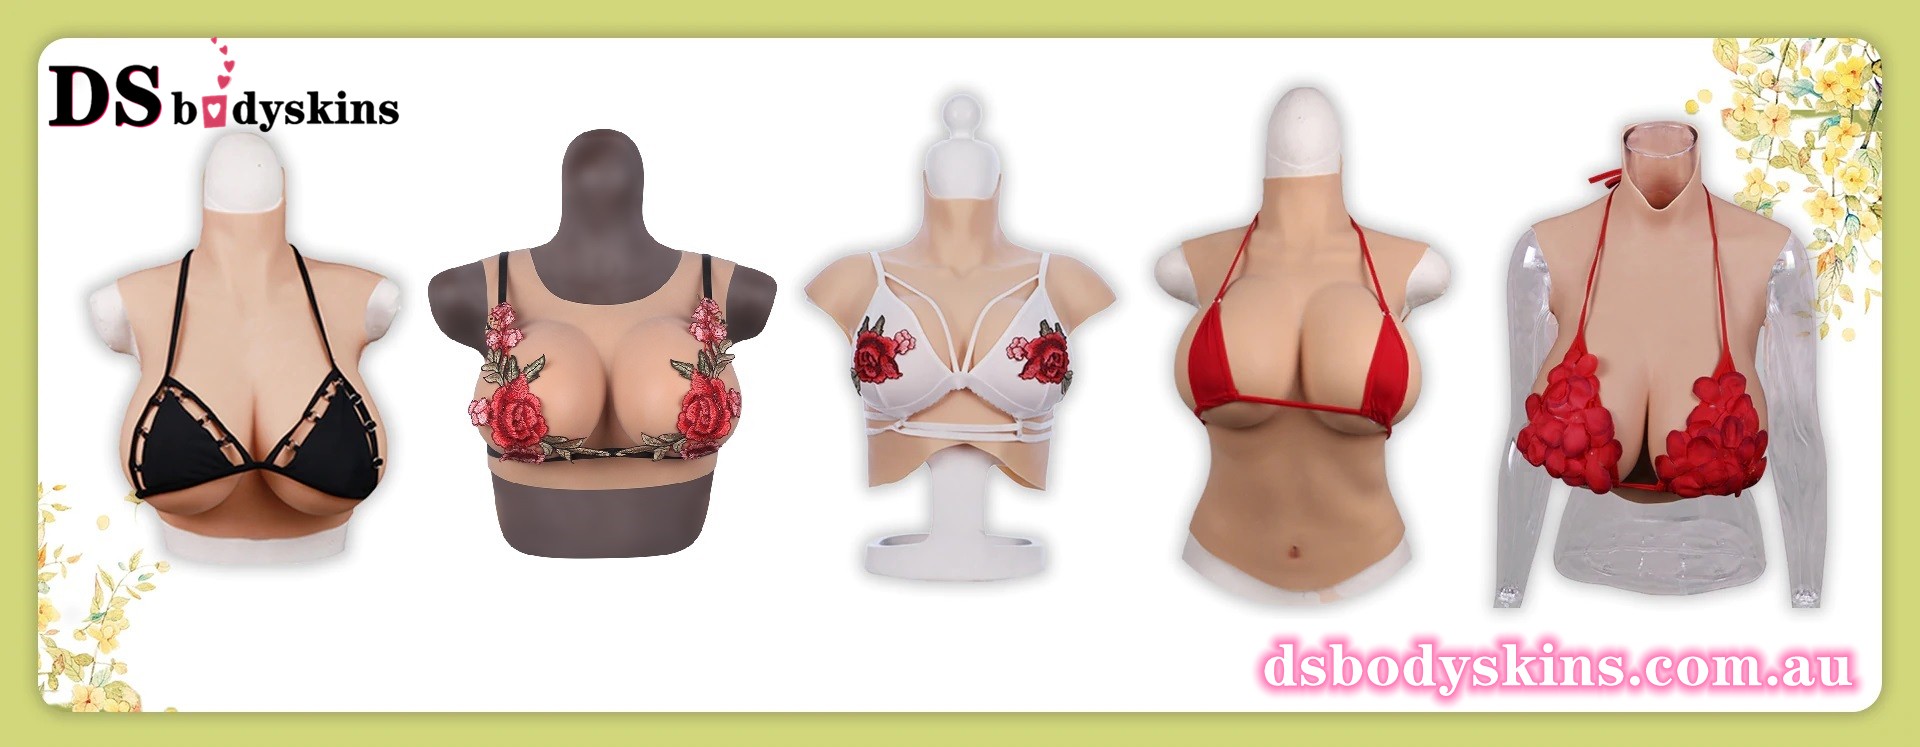 Silicone Breast Forms Buying Guide for User After Mastectomy Surgery